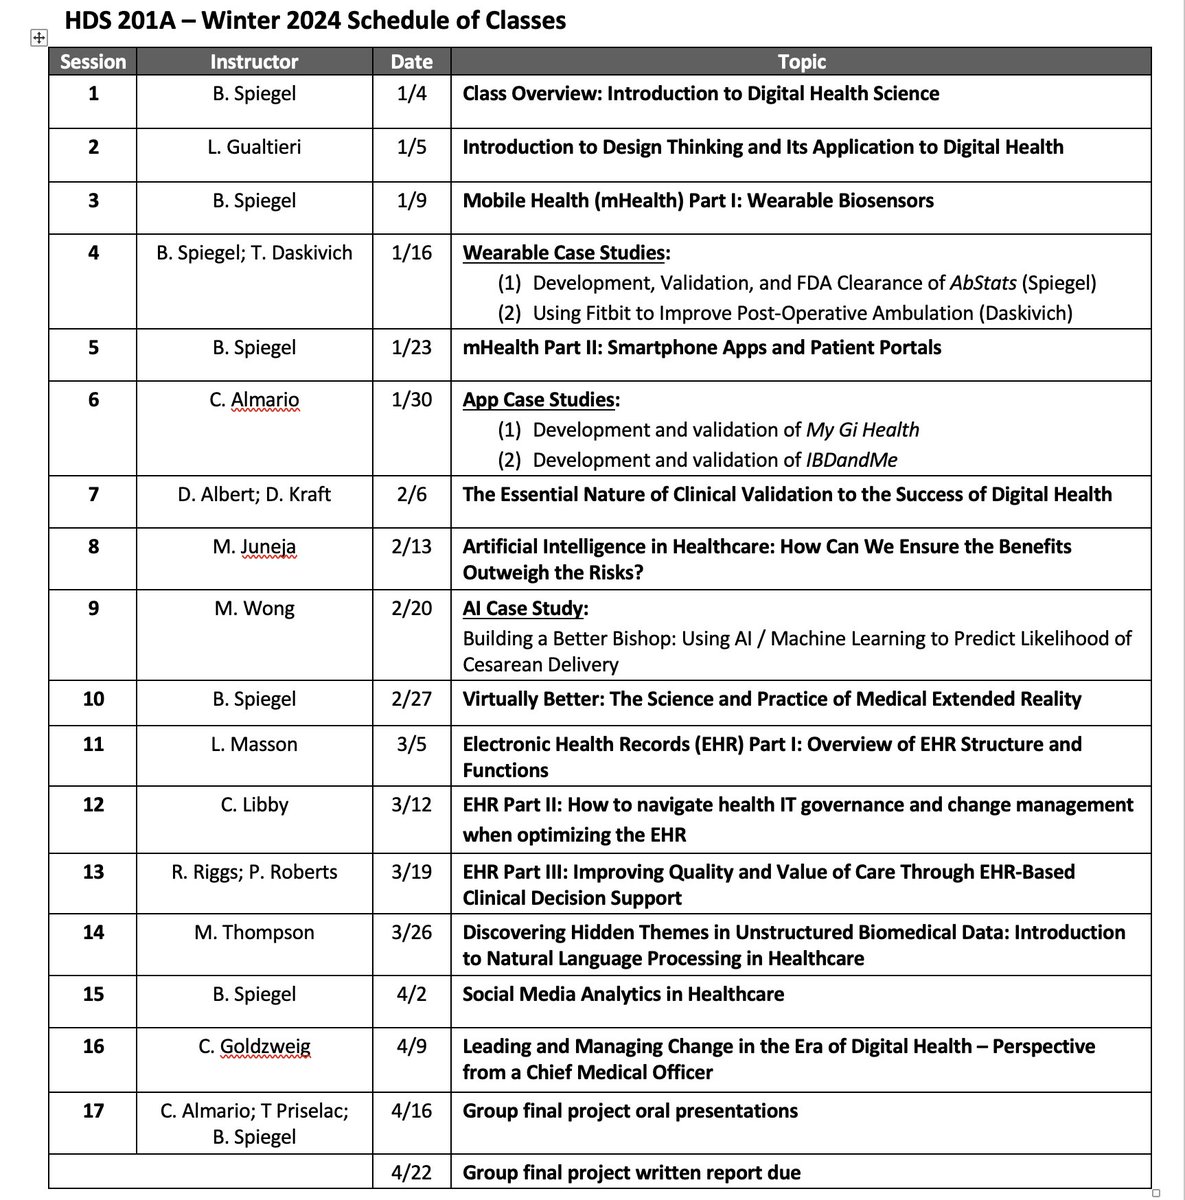 Today we begin our annual #CedarsSinai grad school class on #DigitalHealth science. Here's this year's syllabus. For more on our accredited program in Health Delivery Science, which also covers data analytics, QI, applied epi, health equity, leadership, etc. see:…